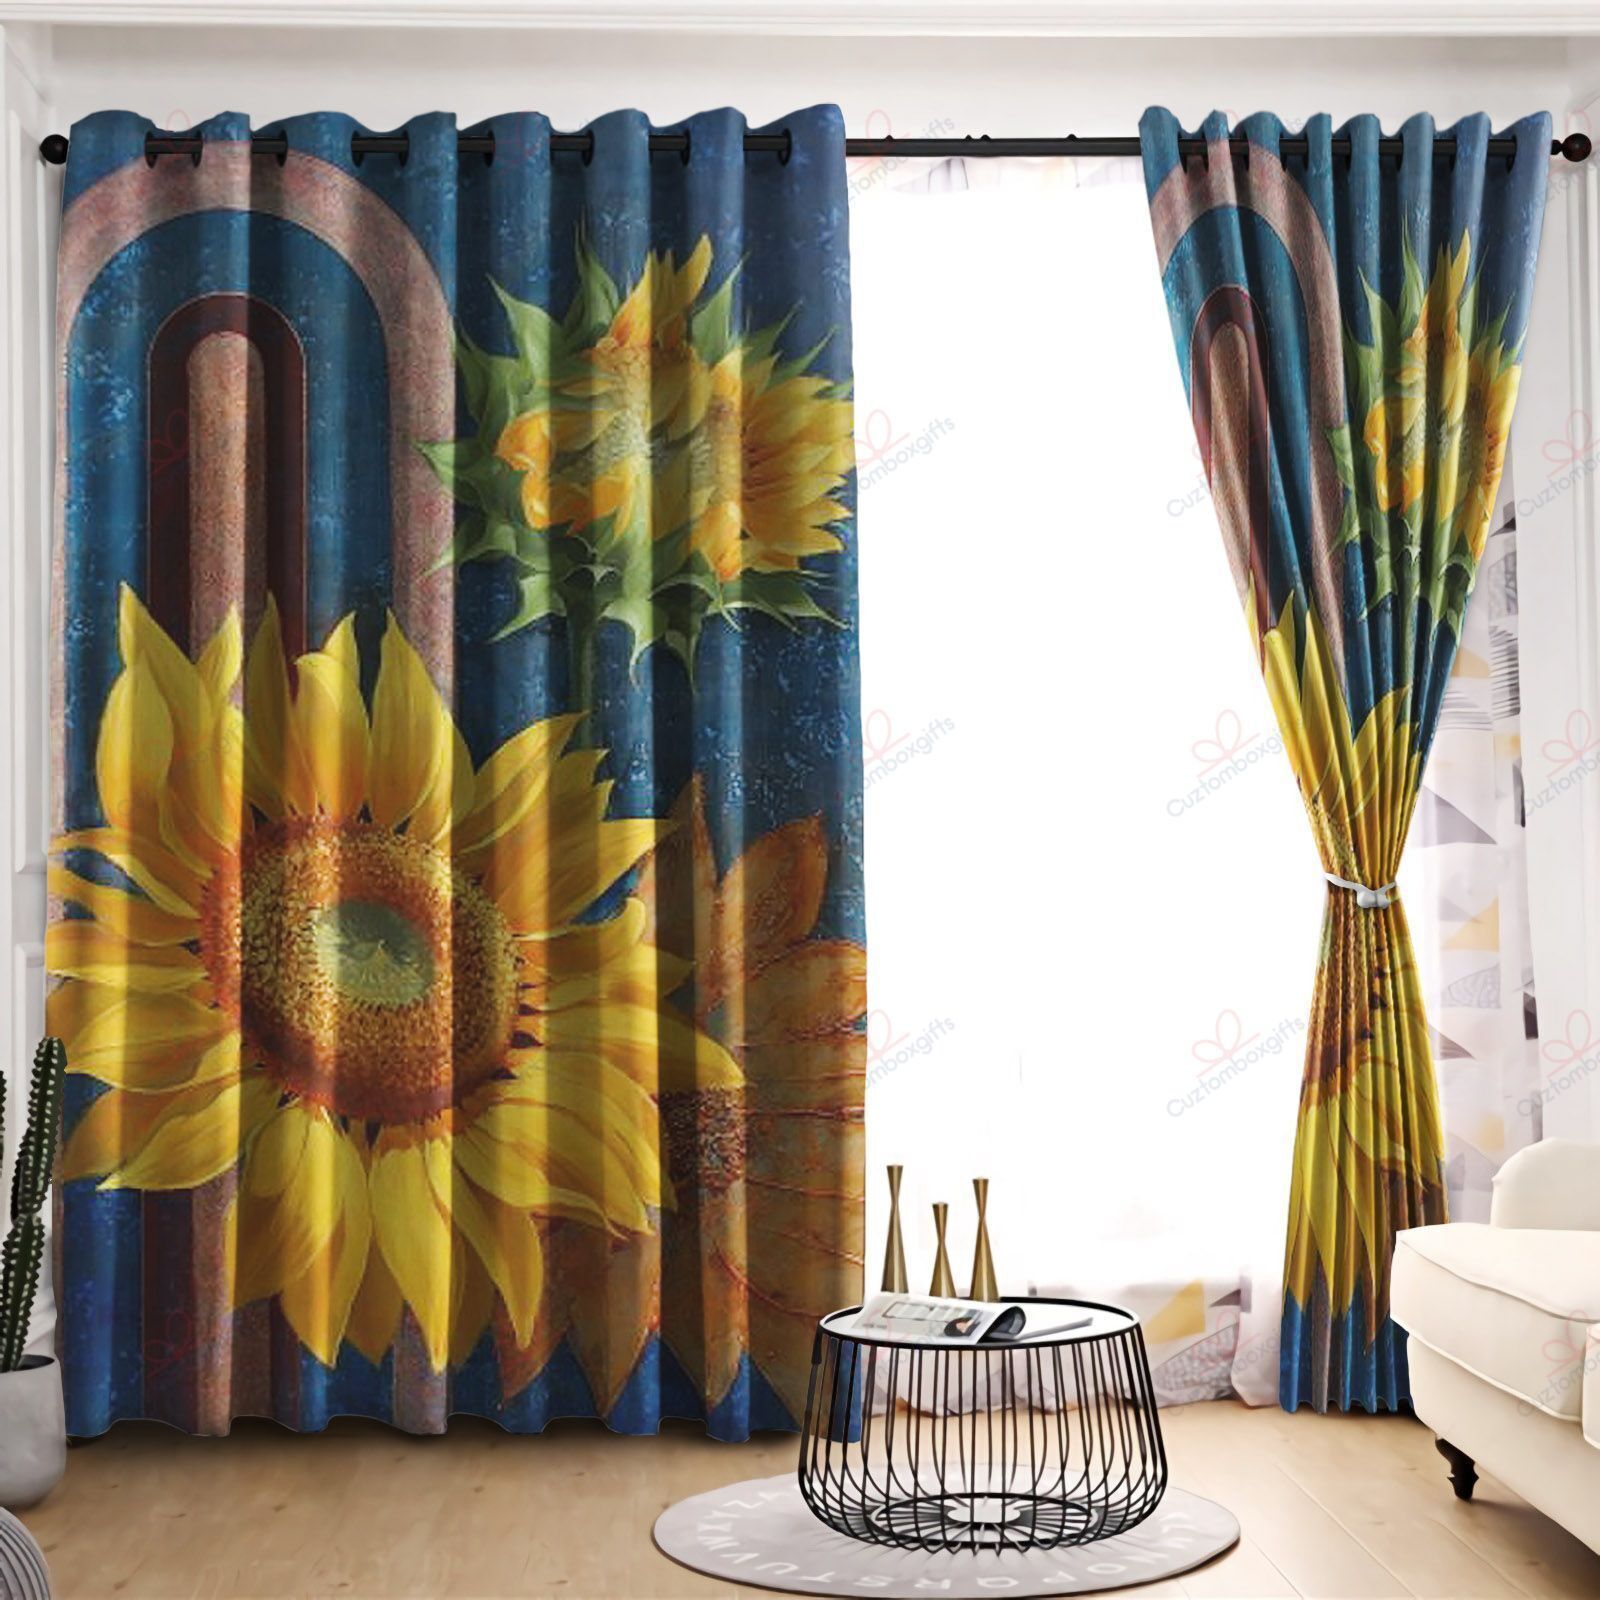 Sunflower Look Up To The Sunshine Printed Window Curtain Home Decor